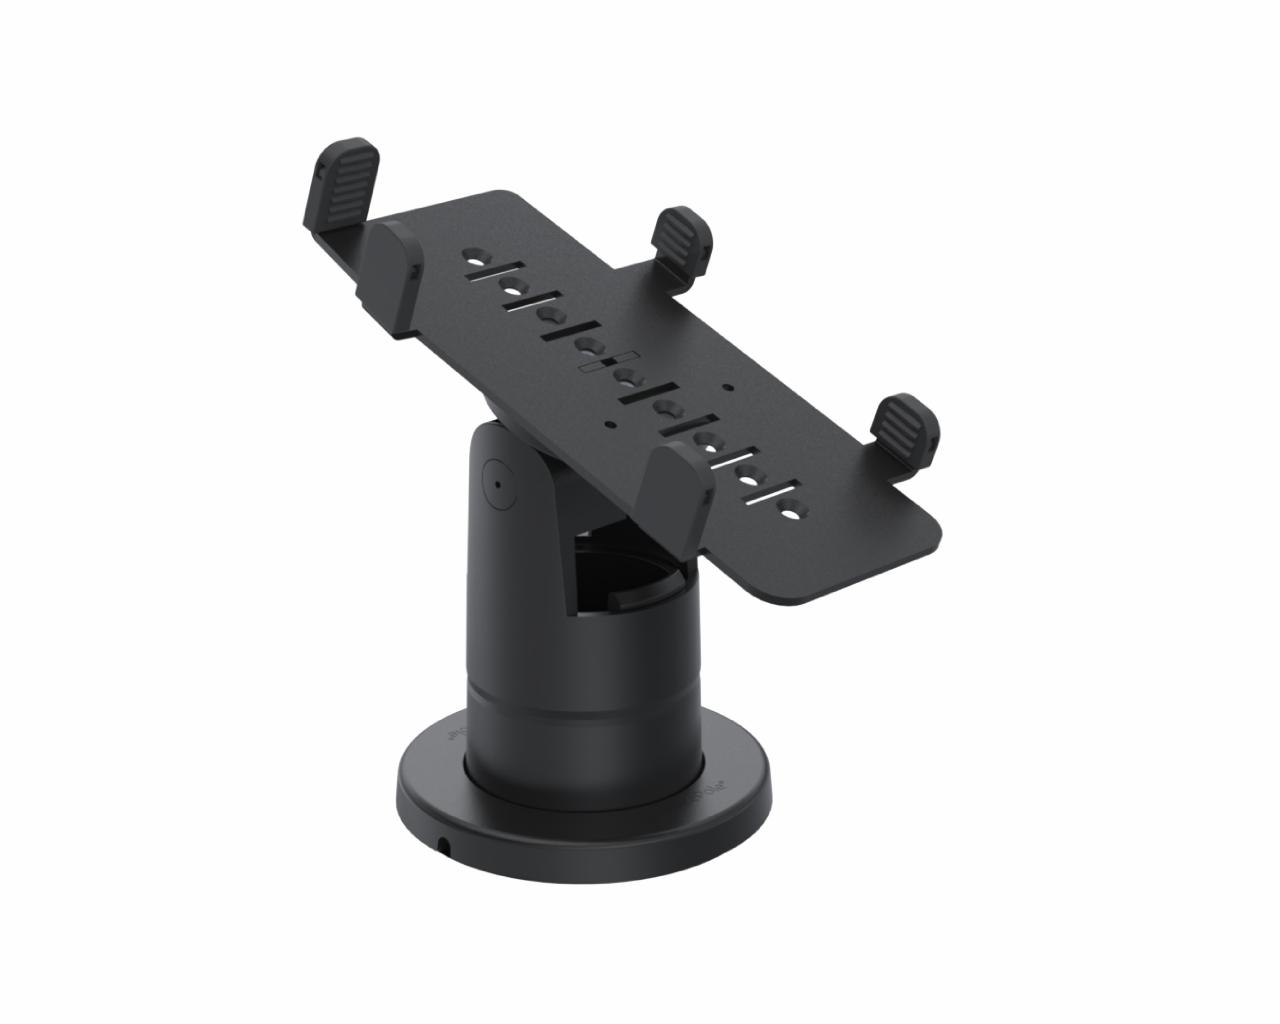 SpacePole Stack with MultiGrip plate for Verifone VX820